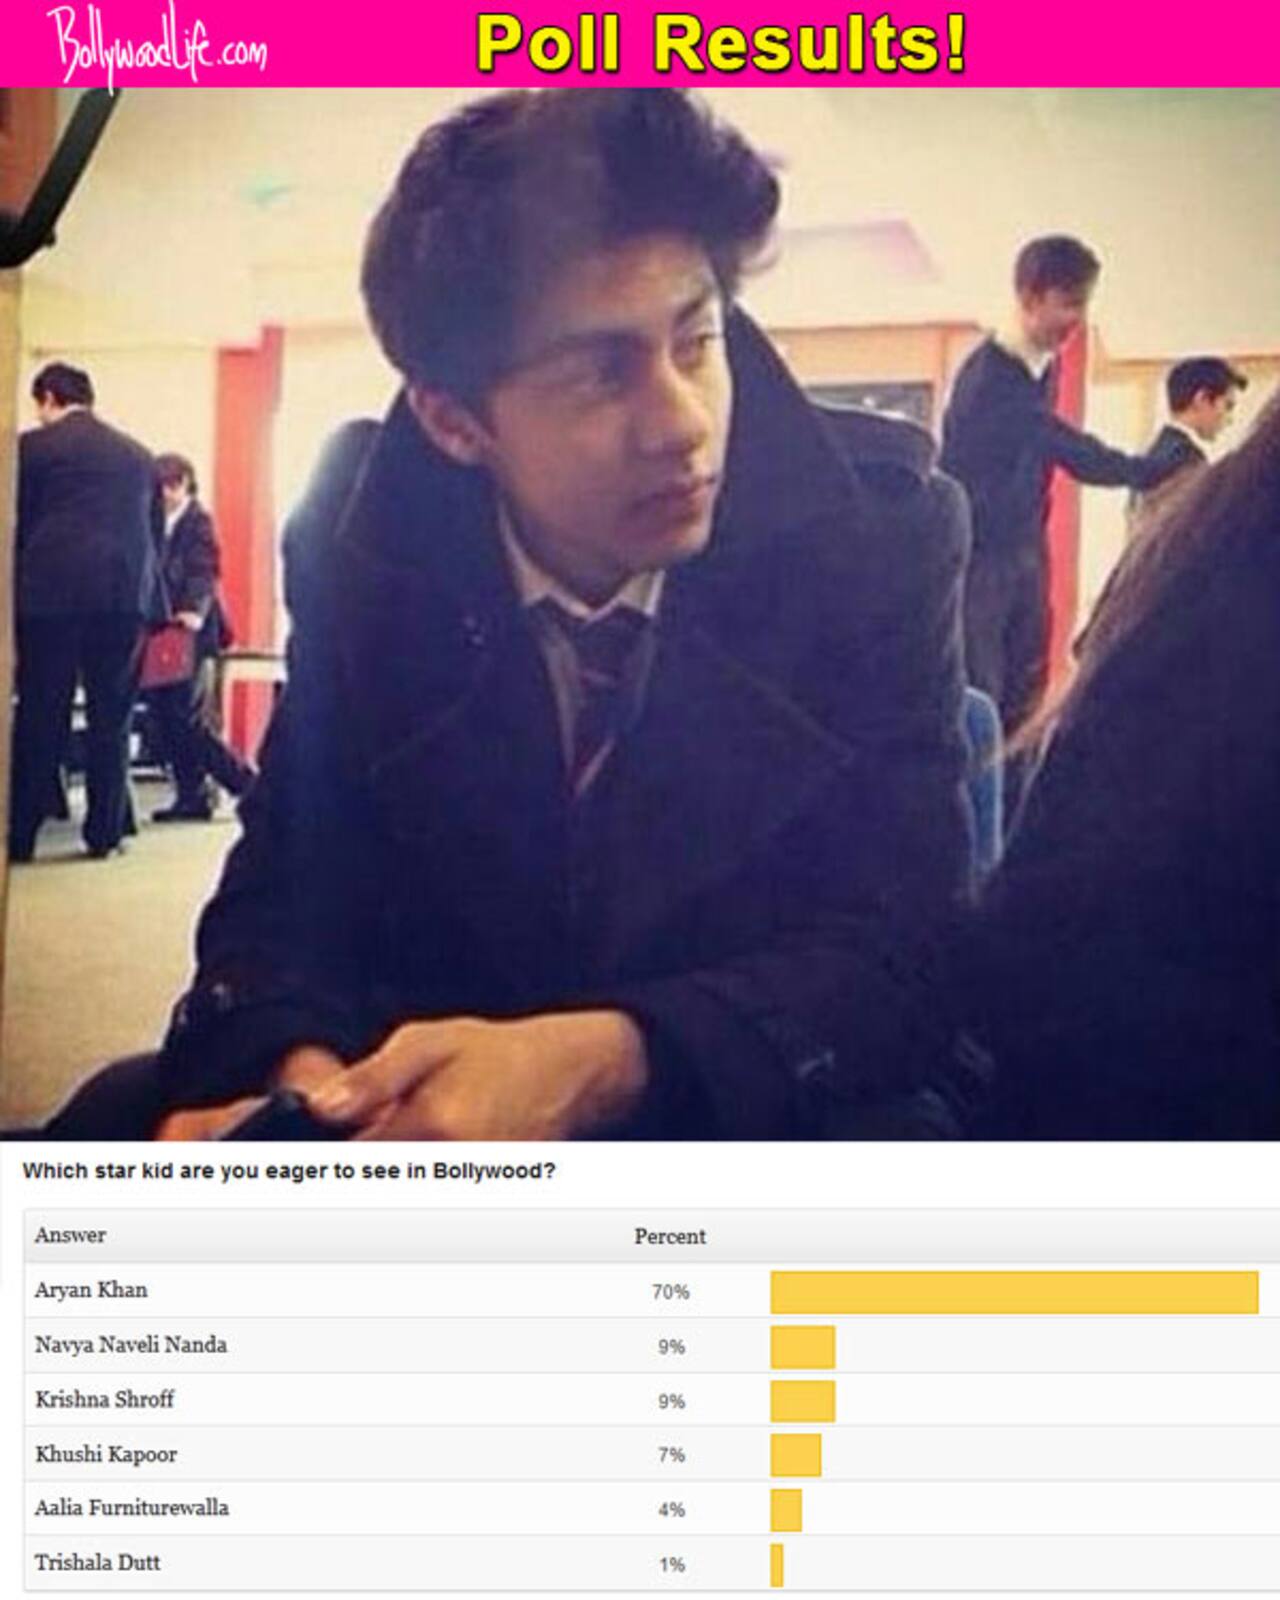 Fans DYING for Shah Rukh Khan's son Aryan's big Bollywood debut - view poll results!